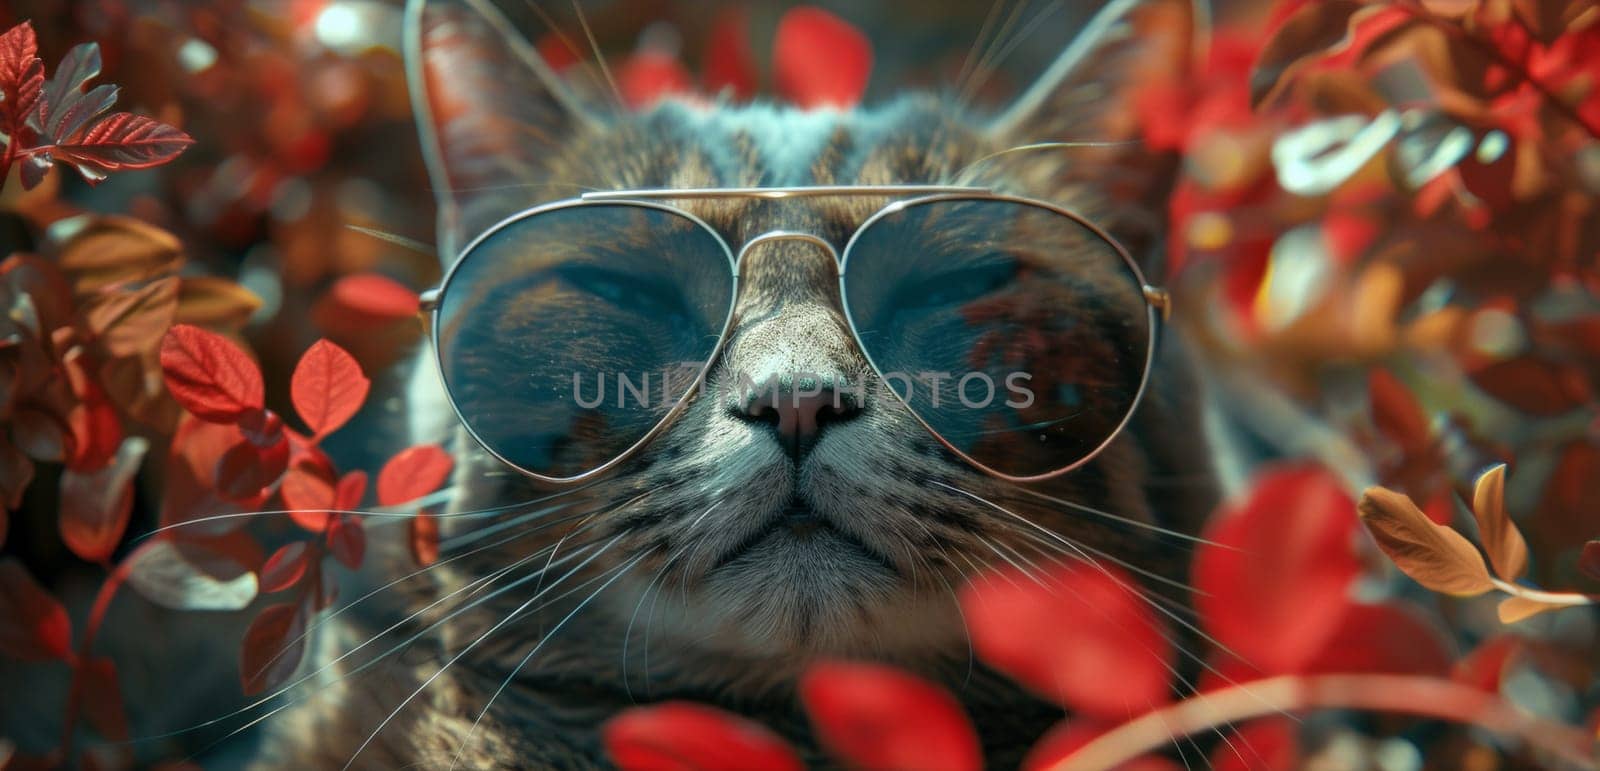 A cat wearing sunglasses and surrounded by leaves with a red background, AI by starush